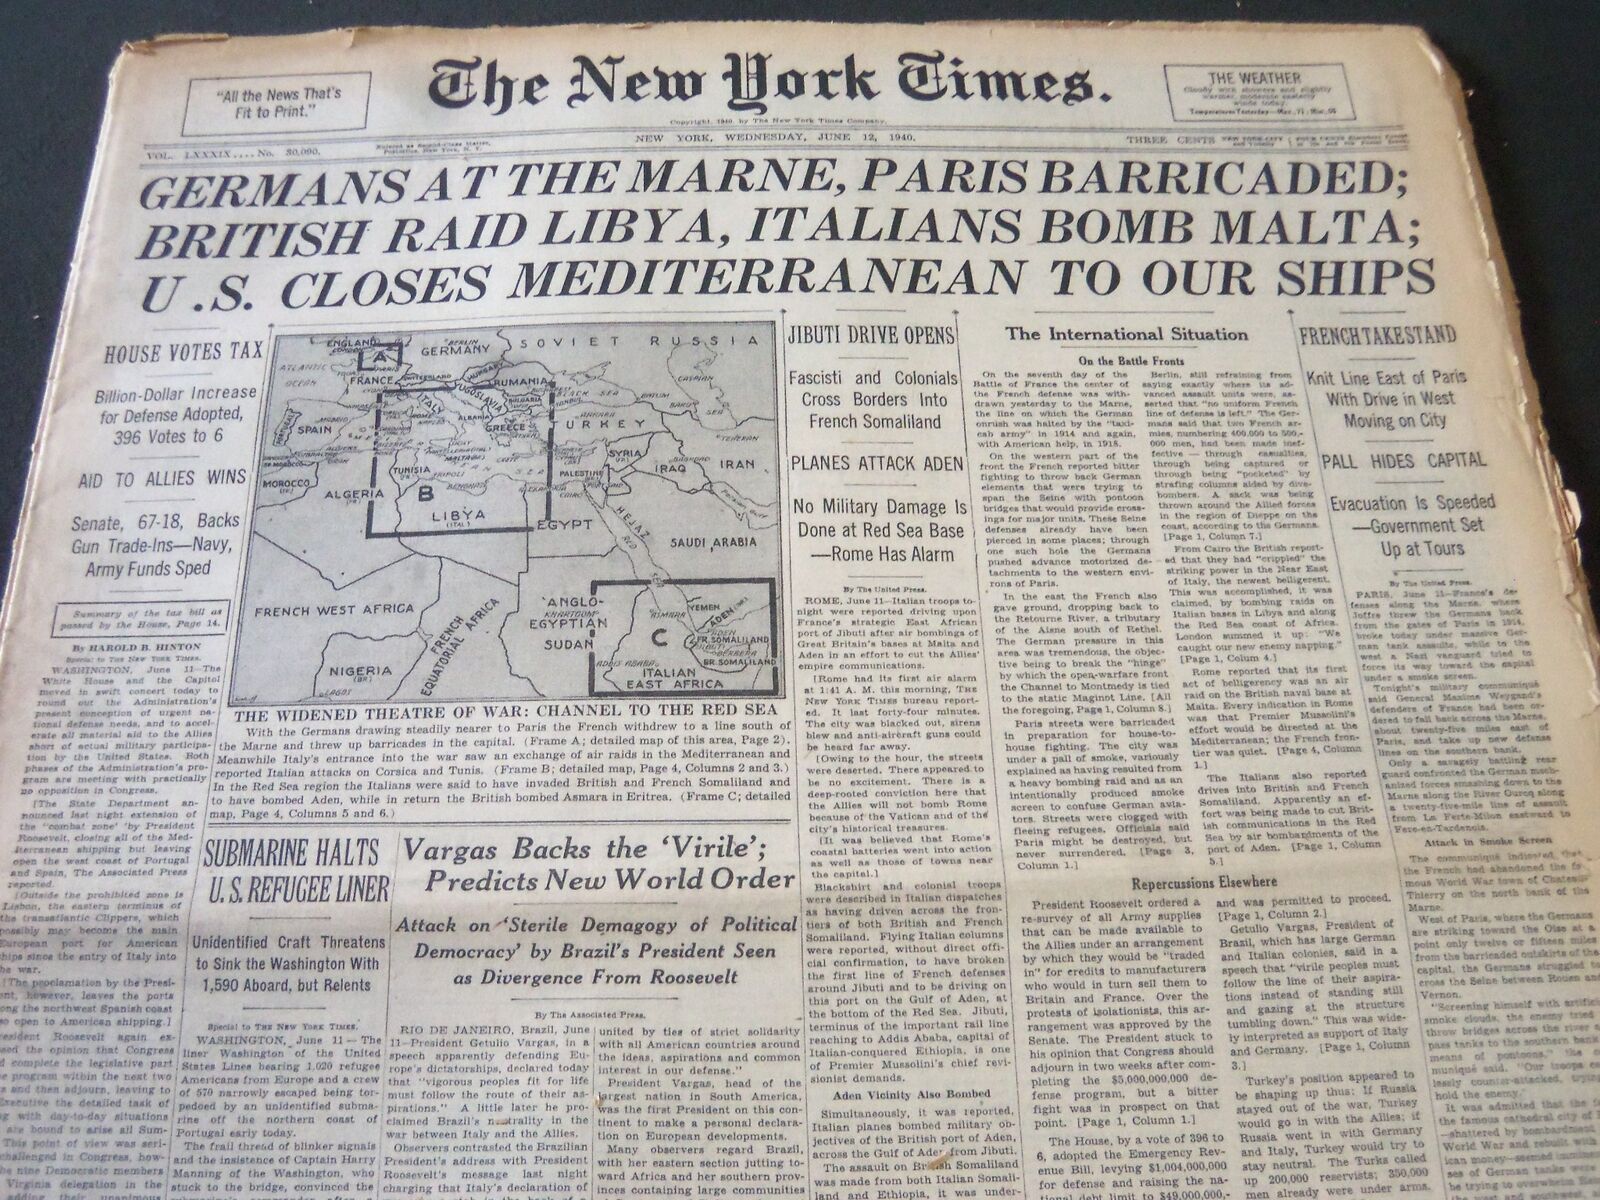 1940 JUNE 12 NEW YORK TIMES - GERMANS AT THE MARNE, PARIS BARRICADED - NT 5922